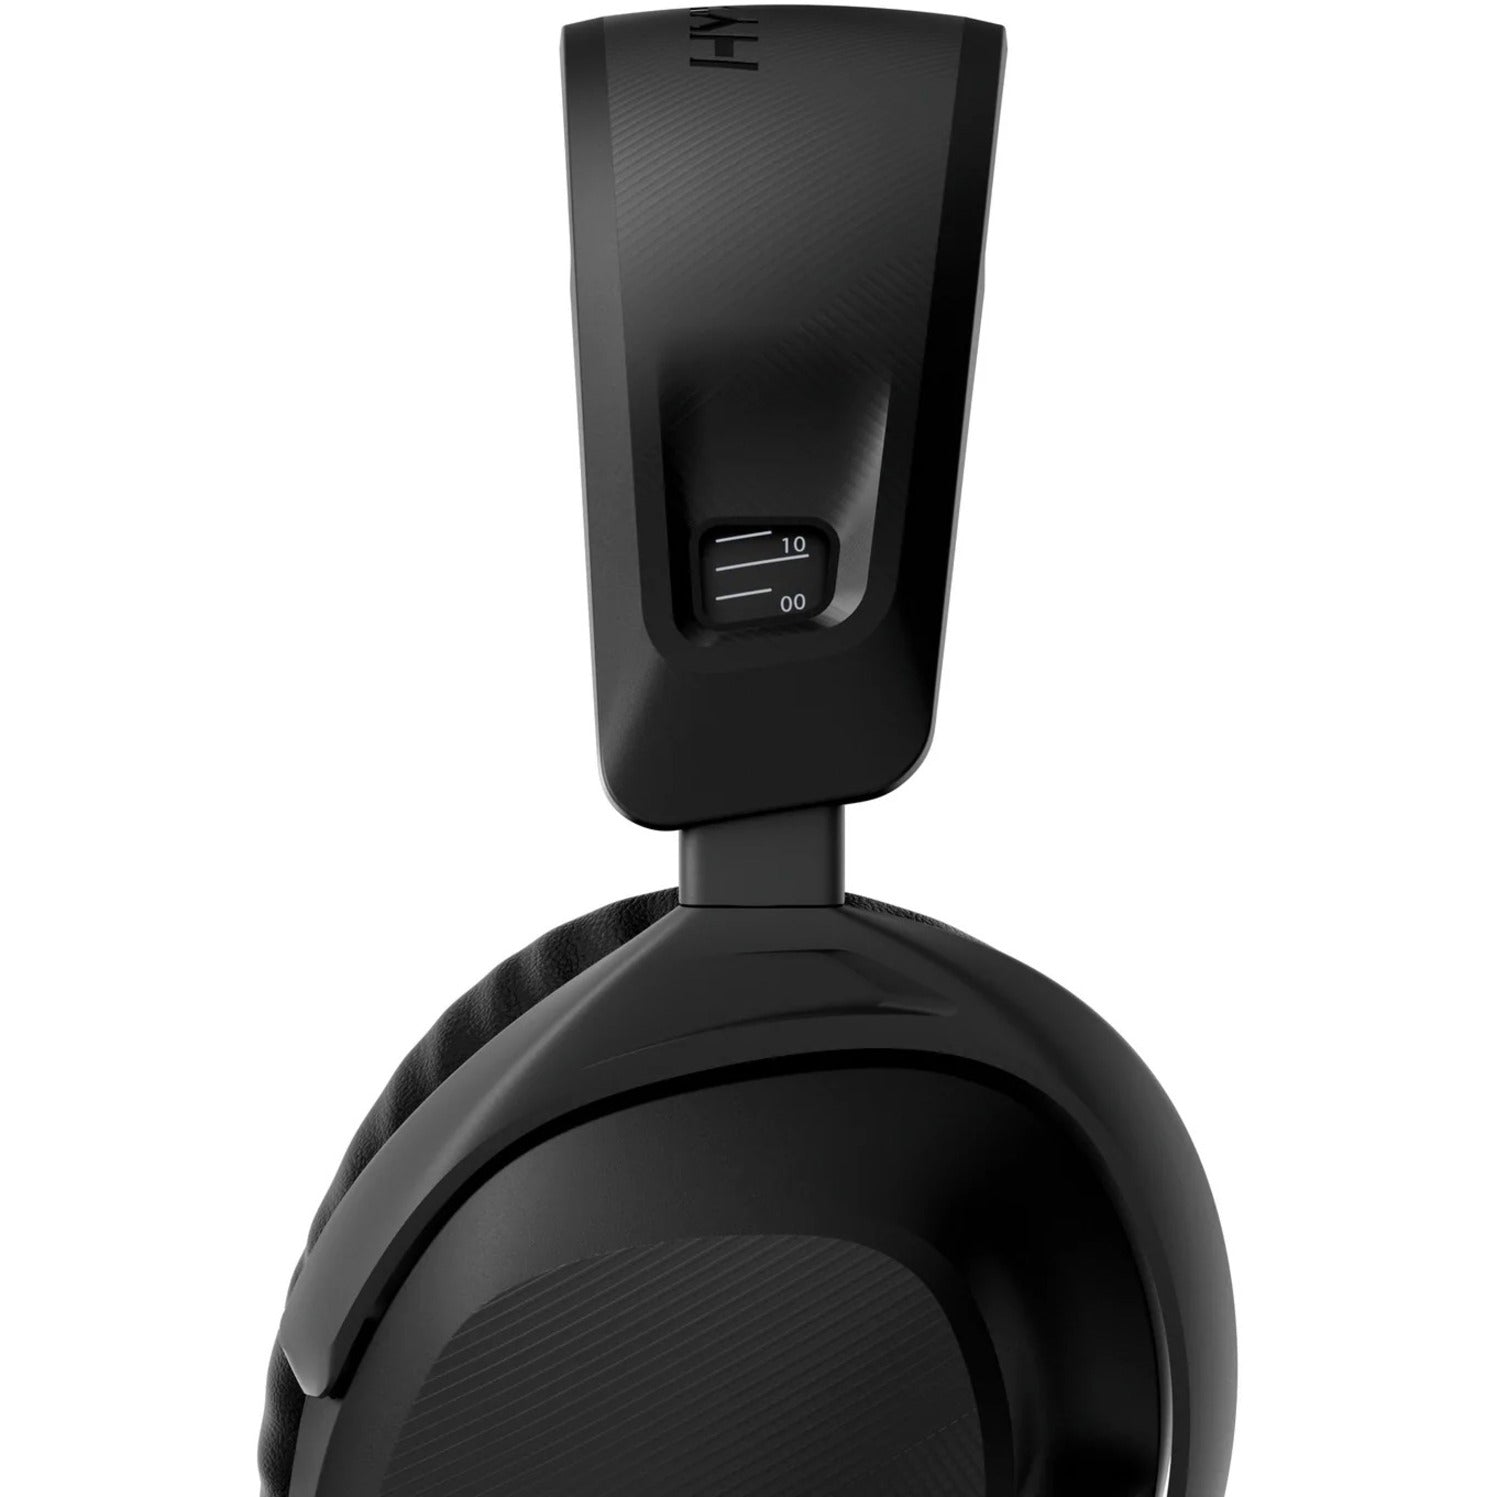 HyperX 519T1AA Cloud Stinger 2 Gaming Headset, DTS Headphone:X, Rotating Ear Cup, Flip to Mute